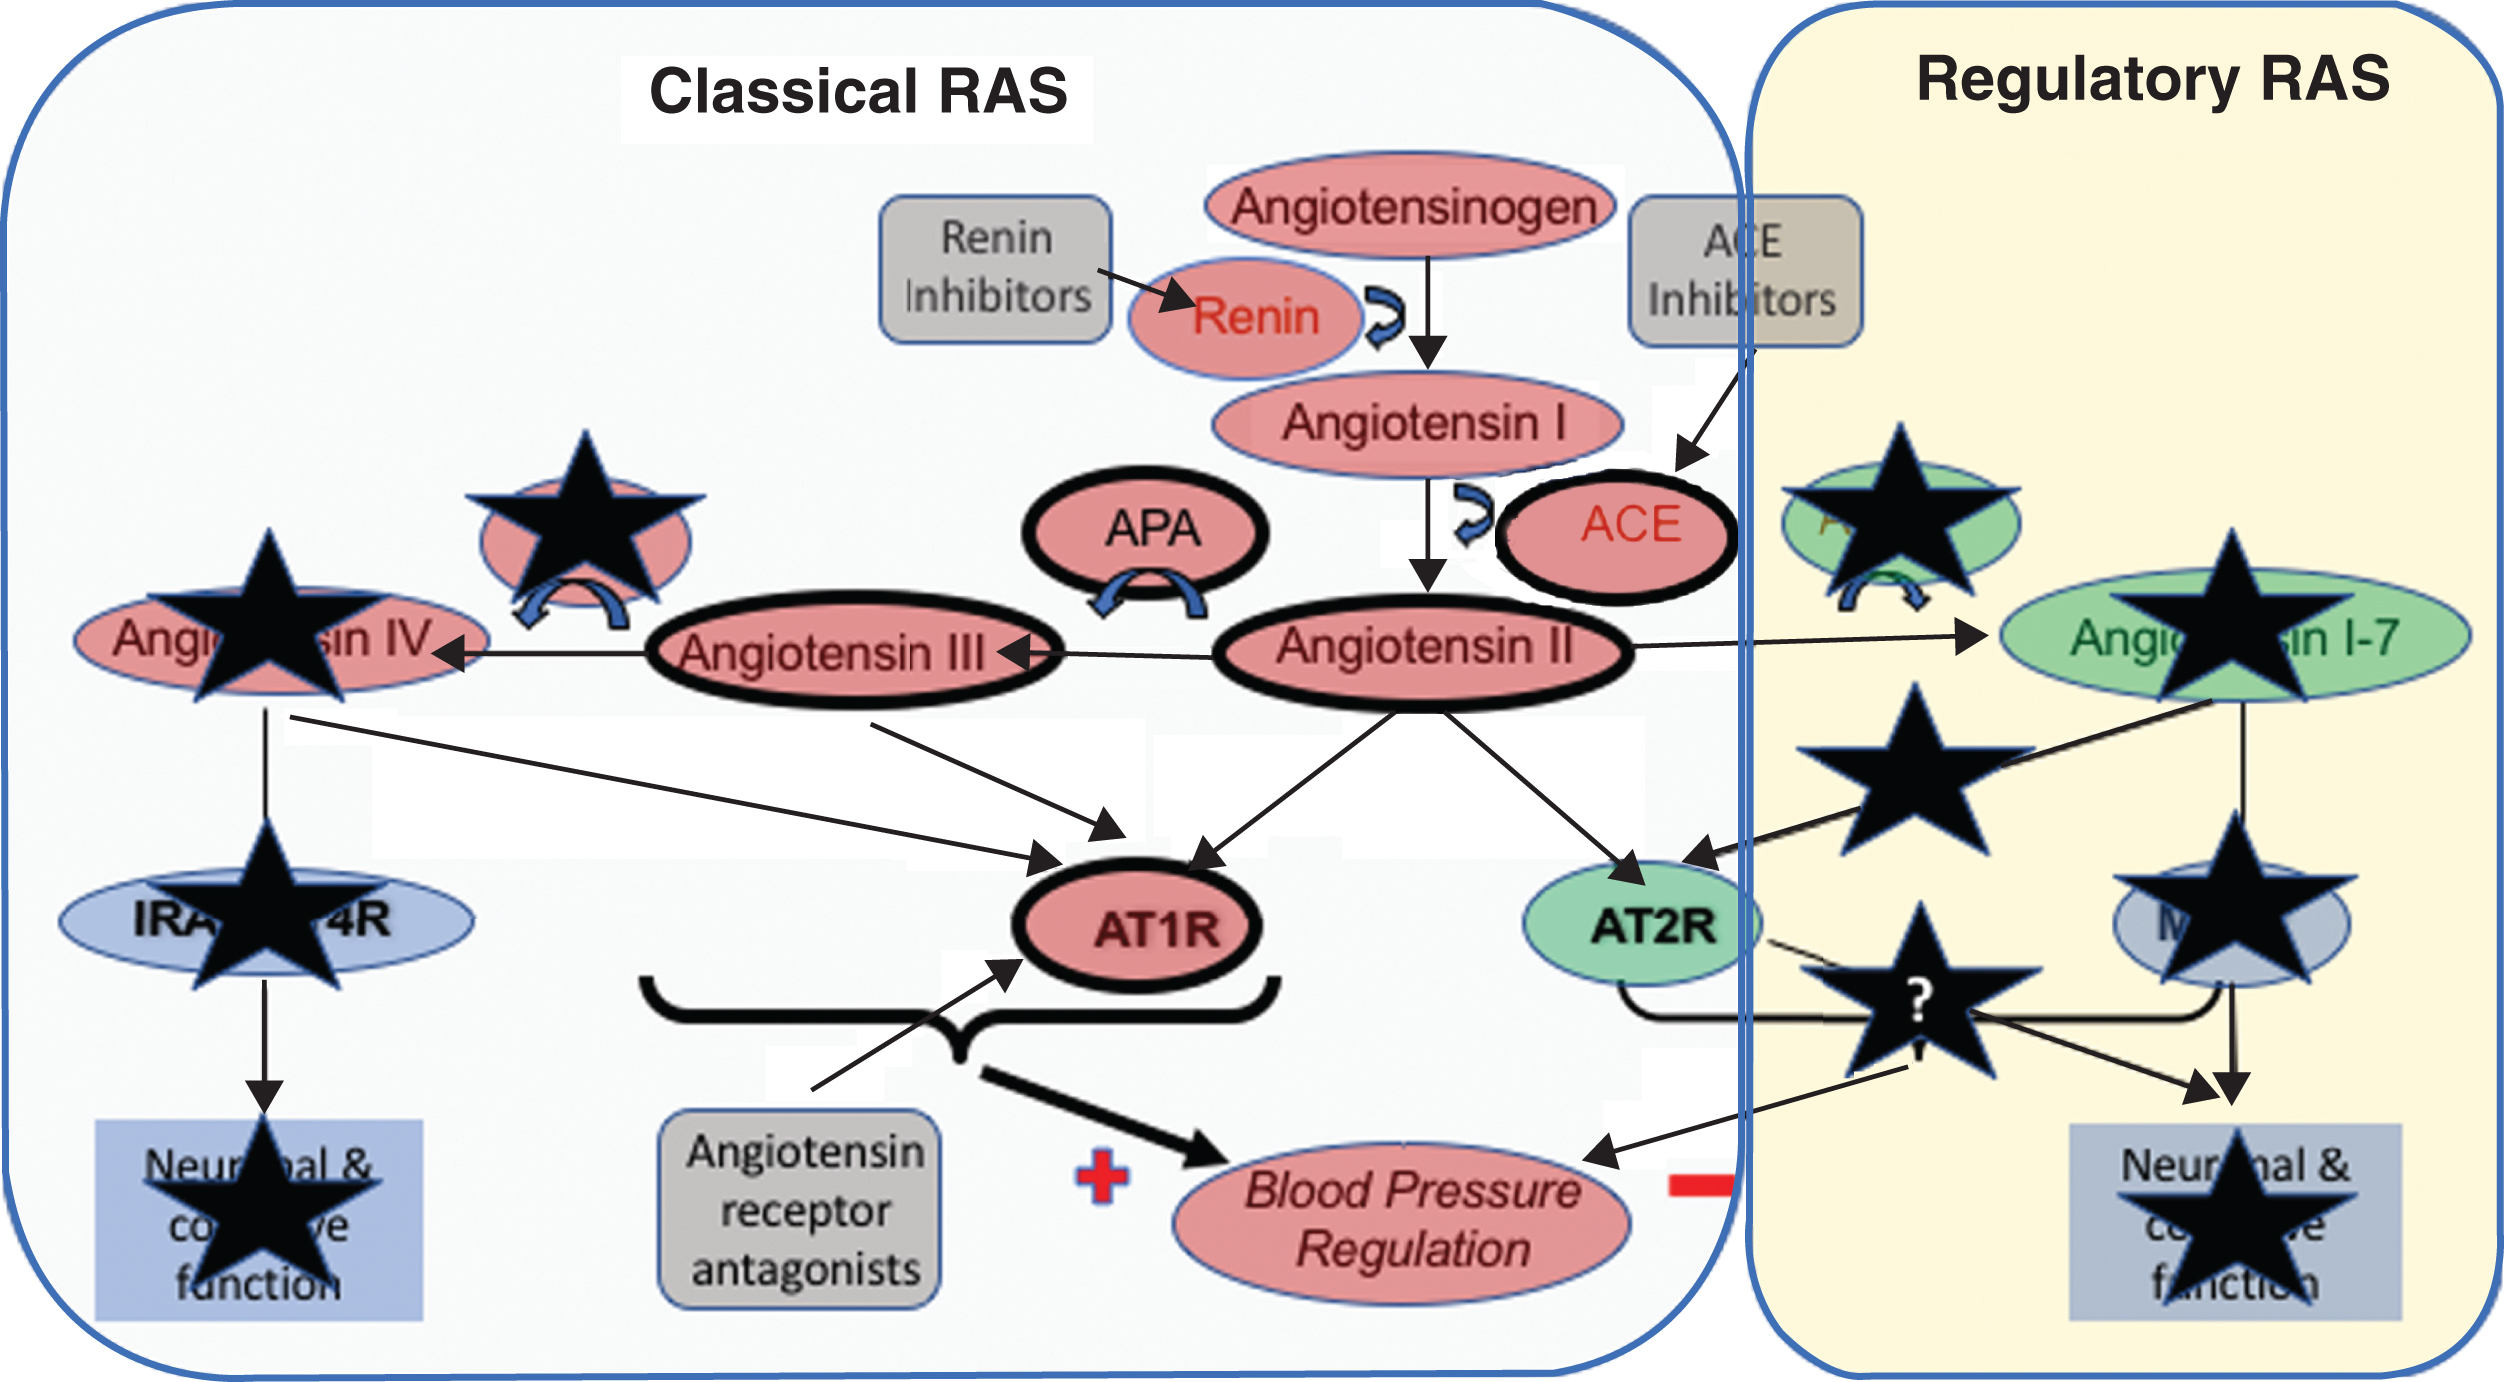 Summary of the observed changes in the RAS system in postmortem AD brain tissue. Changes to various components of the RAS in AD means that the actions of the ‘Classical’ RAS, involving the production of angiotensins II angiotensin III by the sequential actions of angiotensin II converting enzyme (ACE), and aminopeptidases-A and -N on angiotensin I, that their subsequent activation of the angiotensin II type I receptor (AT1R) to raise blood pressure are largely preserved or elevated (denoted by the heaviest weight arrows and heavier borders of components). In contrast, the changes to preserve the classical RAS in AD do not seem extend to angiotensin IV where pressor signaling via AT1R is reduced but so is the capacity to stimulate neuronal signaling that is important to normal cognitive function. The sites where currently licensed drugs, that could be potentially used for the treatment of AD are also illustrated and noticeably present to sites within the classical pathway that is overactive in AD. Renin inhibitors, work to reduce the activity of the RAS pathway as a whole, whereas ACE inhibitors work to reduce the formation of angiotensin II. The angiotensin receptor antagonists in contrast serve to inhibit the binding of angiotensin II (and other angiotensins to AT1R) to promote vasodilation through the stimulation of AT2R by angiotensin II that is also thought to be involved in cognitive function. Alzheimer’s related changes also show a clear down regulation of the ‘Regulatory RAS’ (denoted by black coloured stars) where the scope to initiate (neuronal) signaling through both AT2R and MasR is reduced, with that likely loss of function that may explain some elements of cognitive decline and that all stem from observed significant reductions in angiotensin II converting enzyme 2 (ACE2) activity seen in AD, and significant elevations (as highlighted with stronger lines) of ANGII and ANGIII and their likely increased signaling through AT1R.